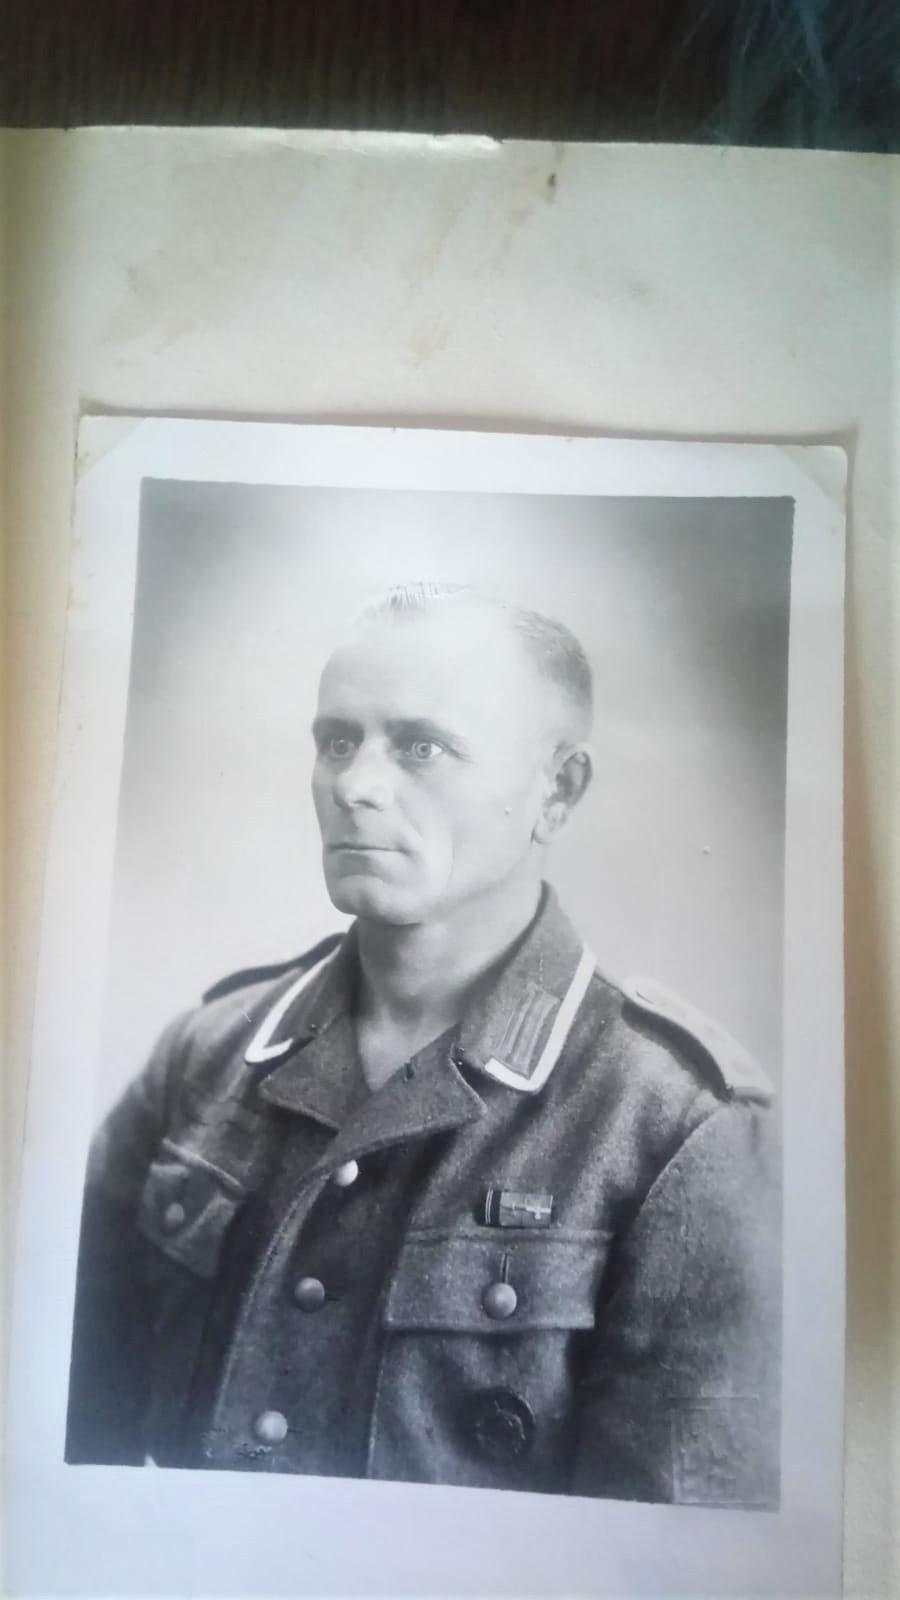 The only existing picture of my great-grandfather who fought at the eastern front and got the 1000 yard stare. At least 12 years of service in the Wehrmacht, wounded, fought in the Winterbattle 1941-1942.jpg